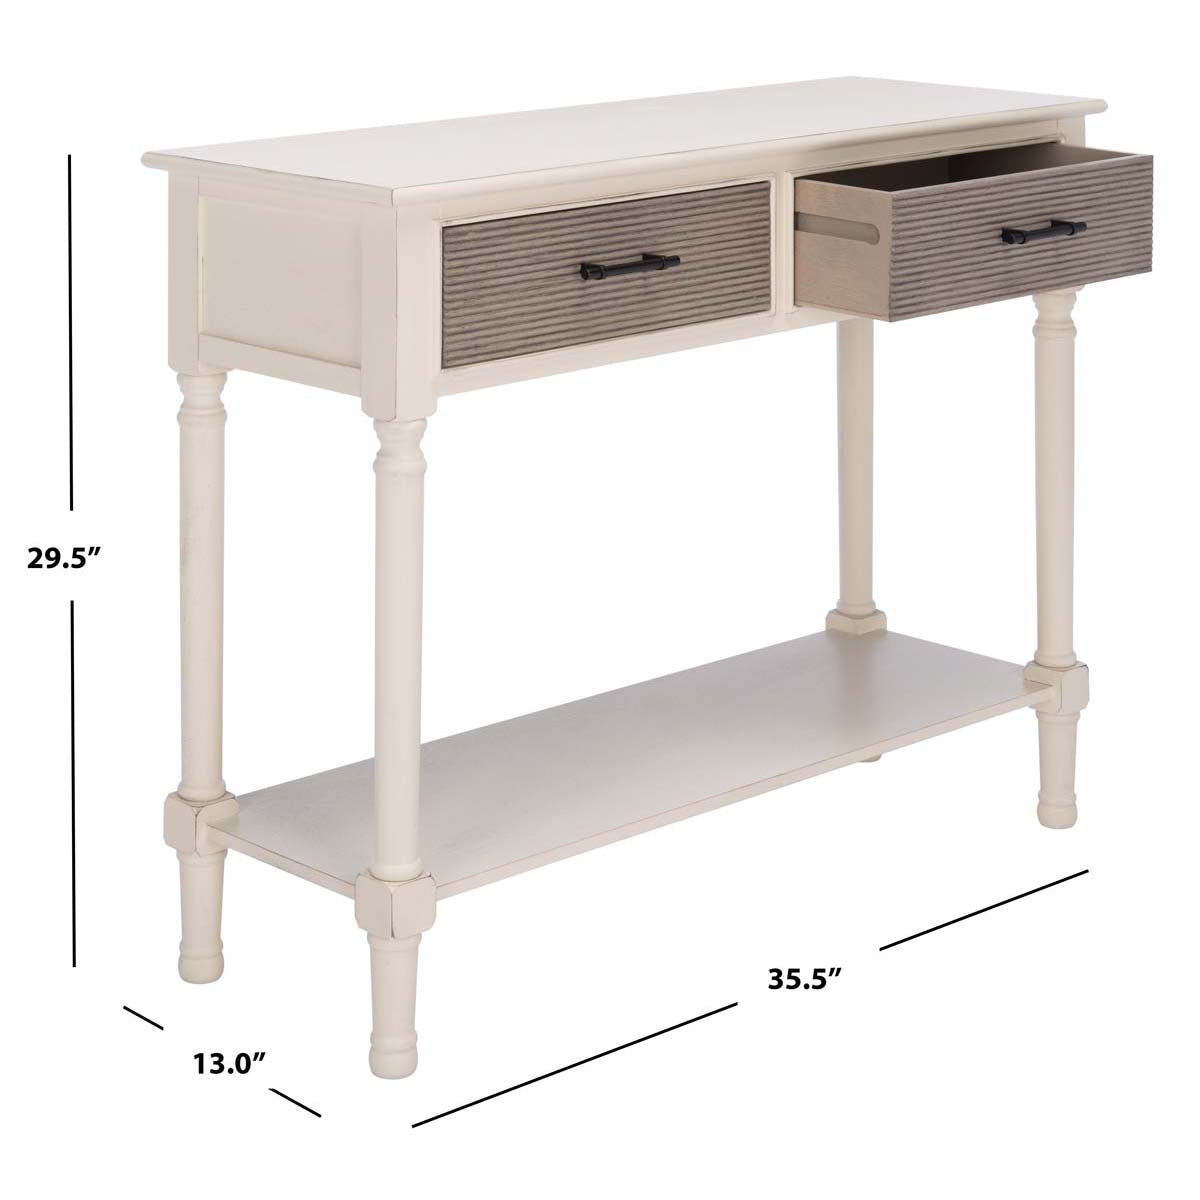 Safavieh Ryder 2Drw Console Table, CNS5719 - Distressed White / Greige Drawers